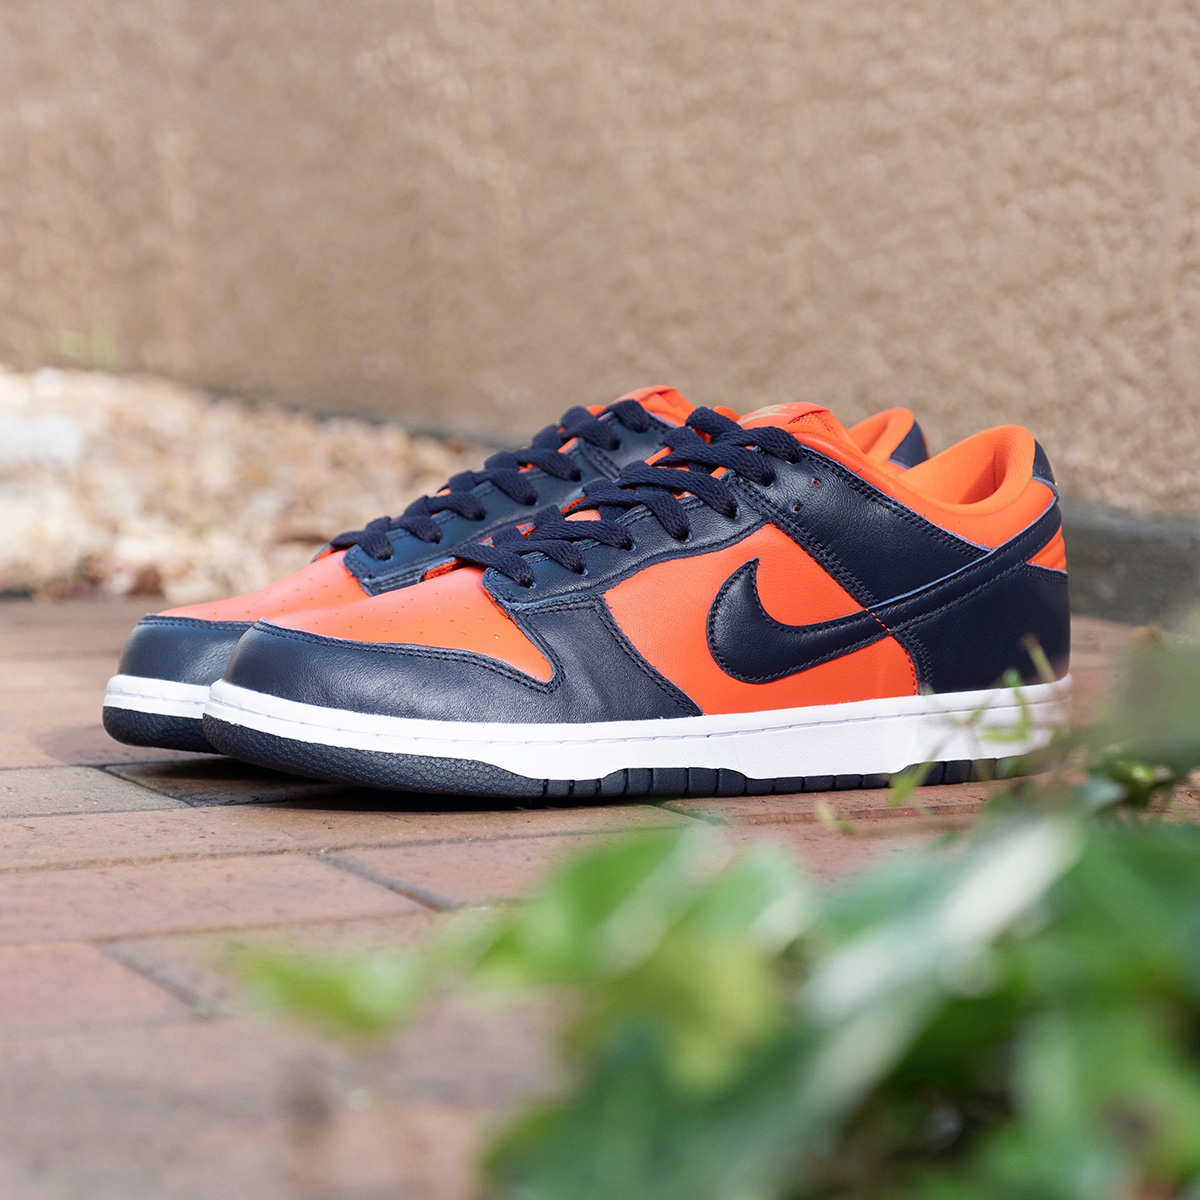 NIKE DUNK LOW SP “CHAMP COLORS” | 特集ページ Features | mita sneakers